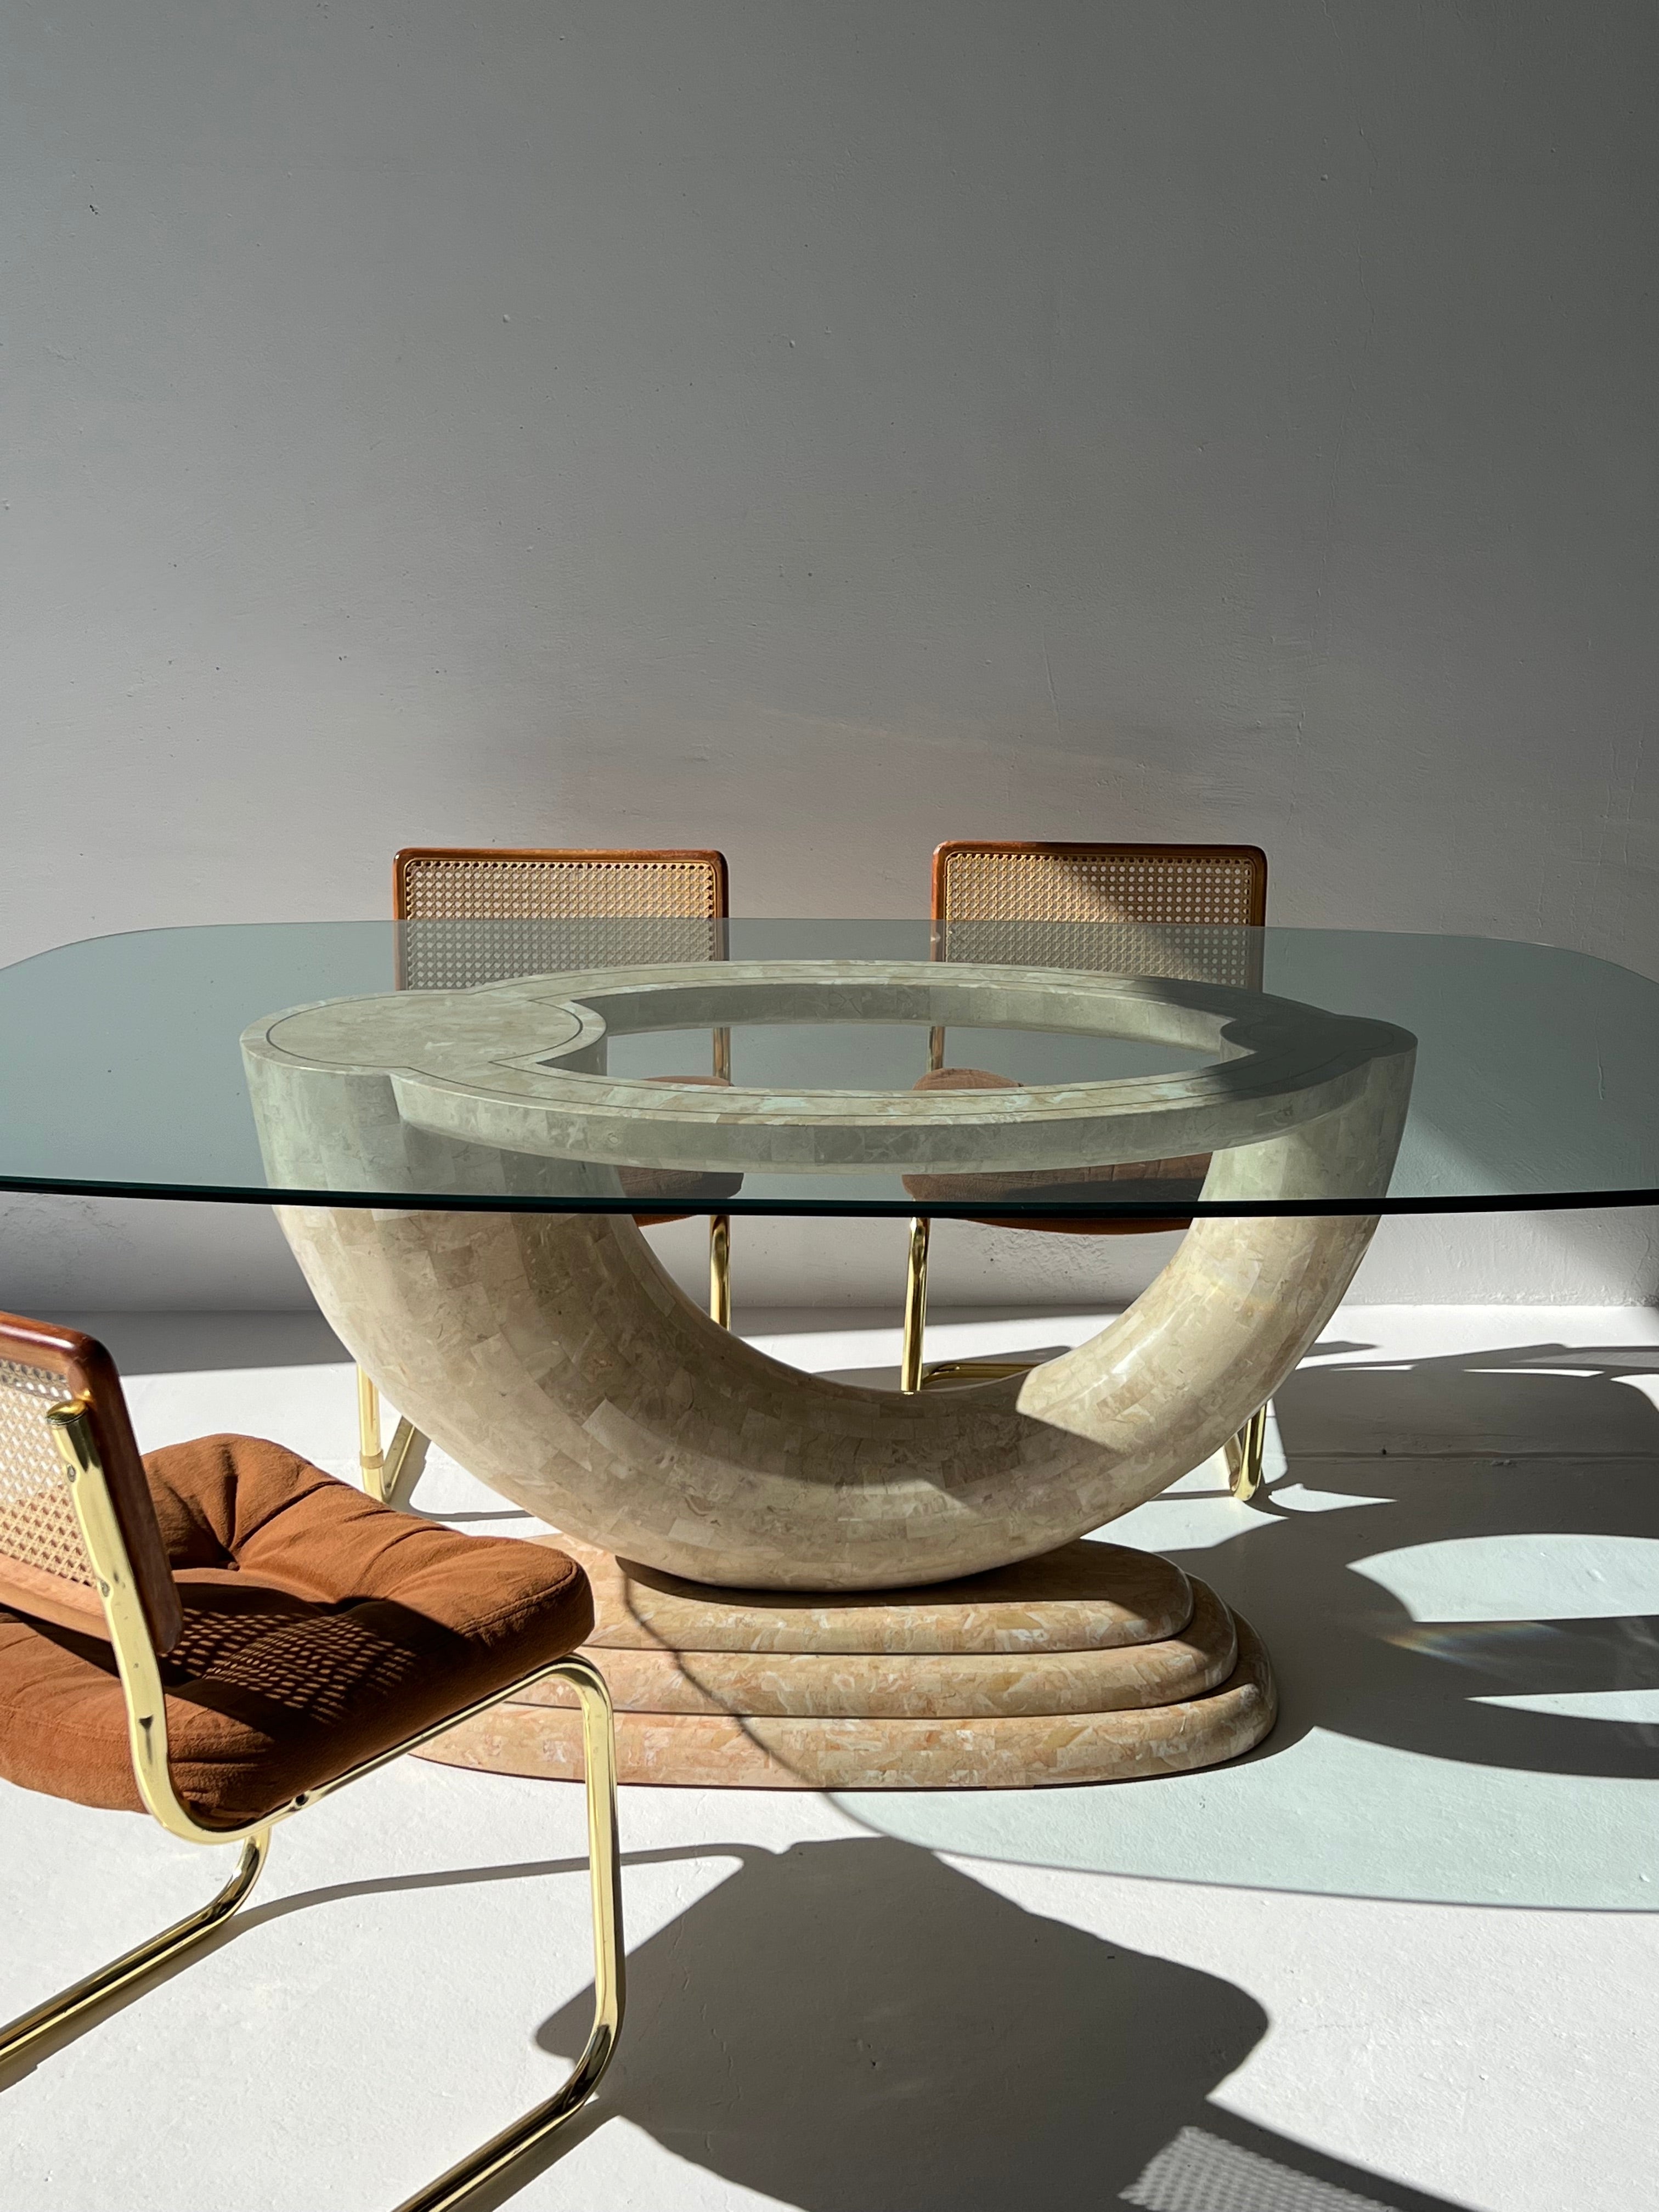 Tessellated Stone Dining Table with Glass Top